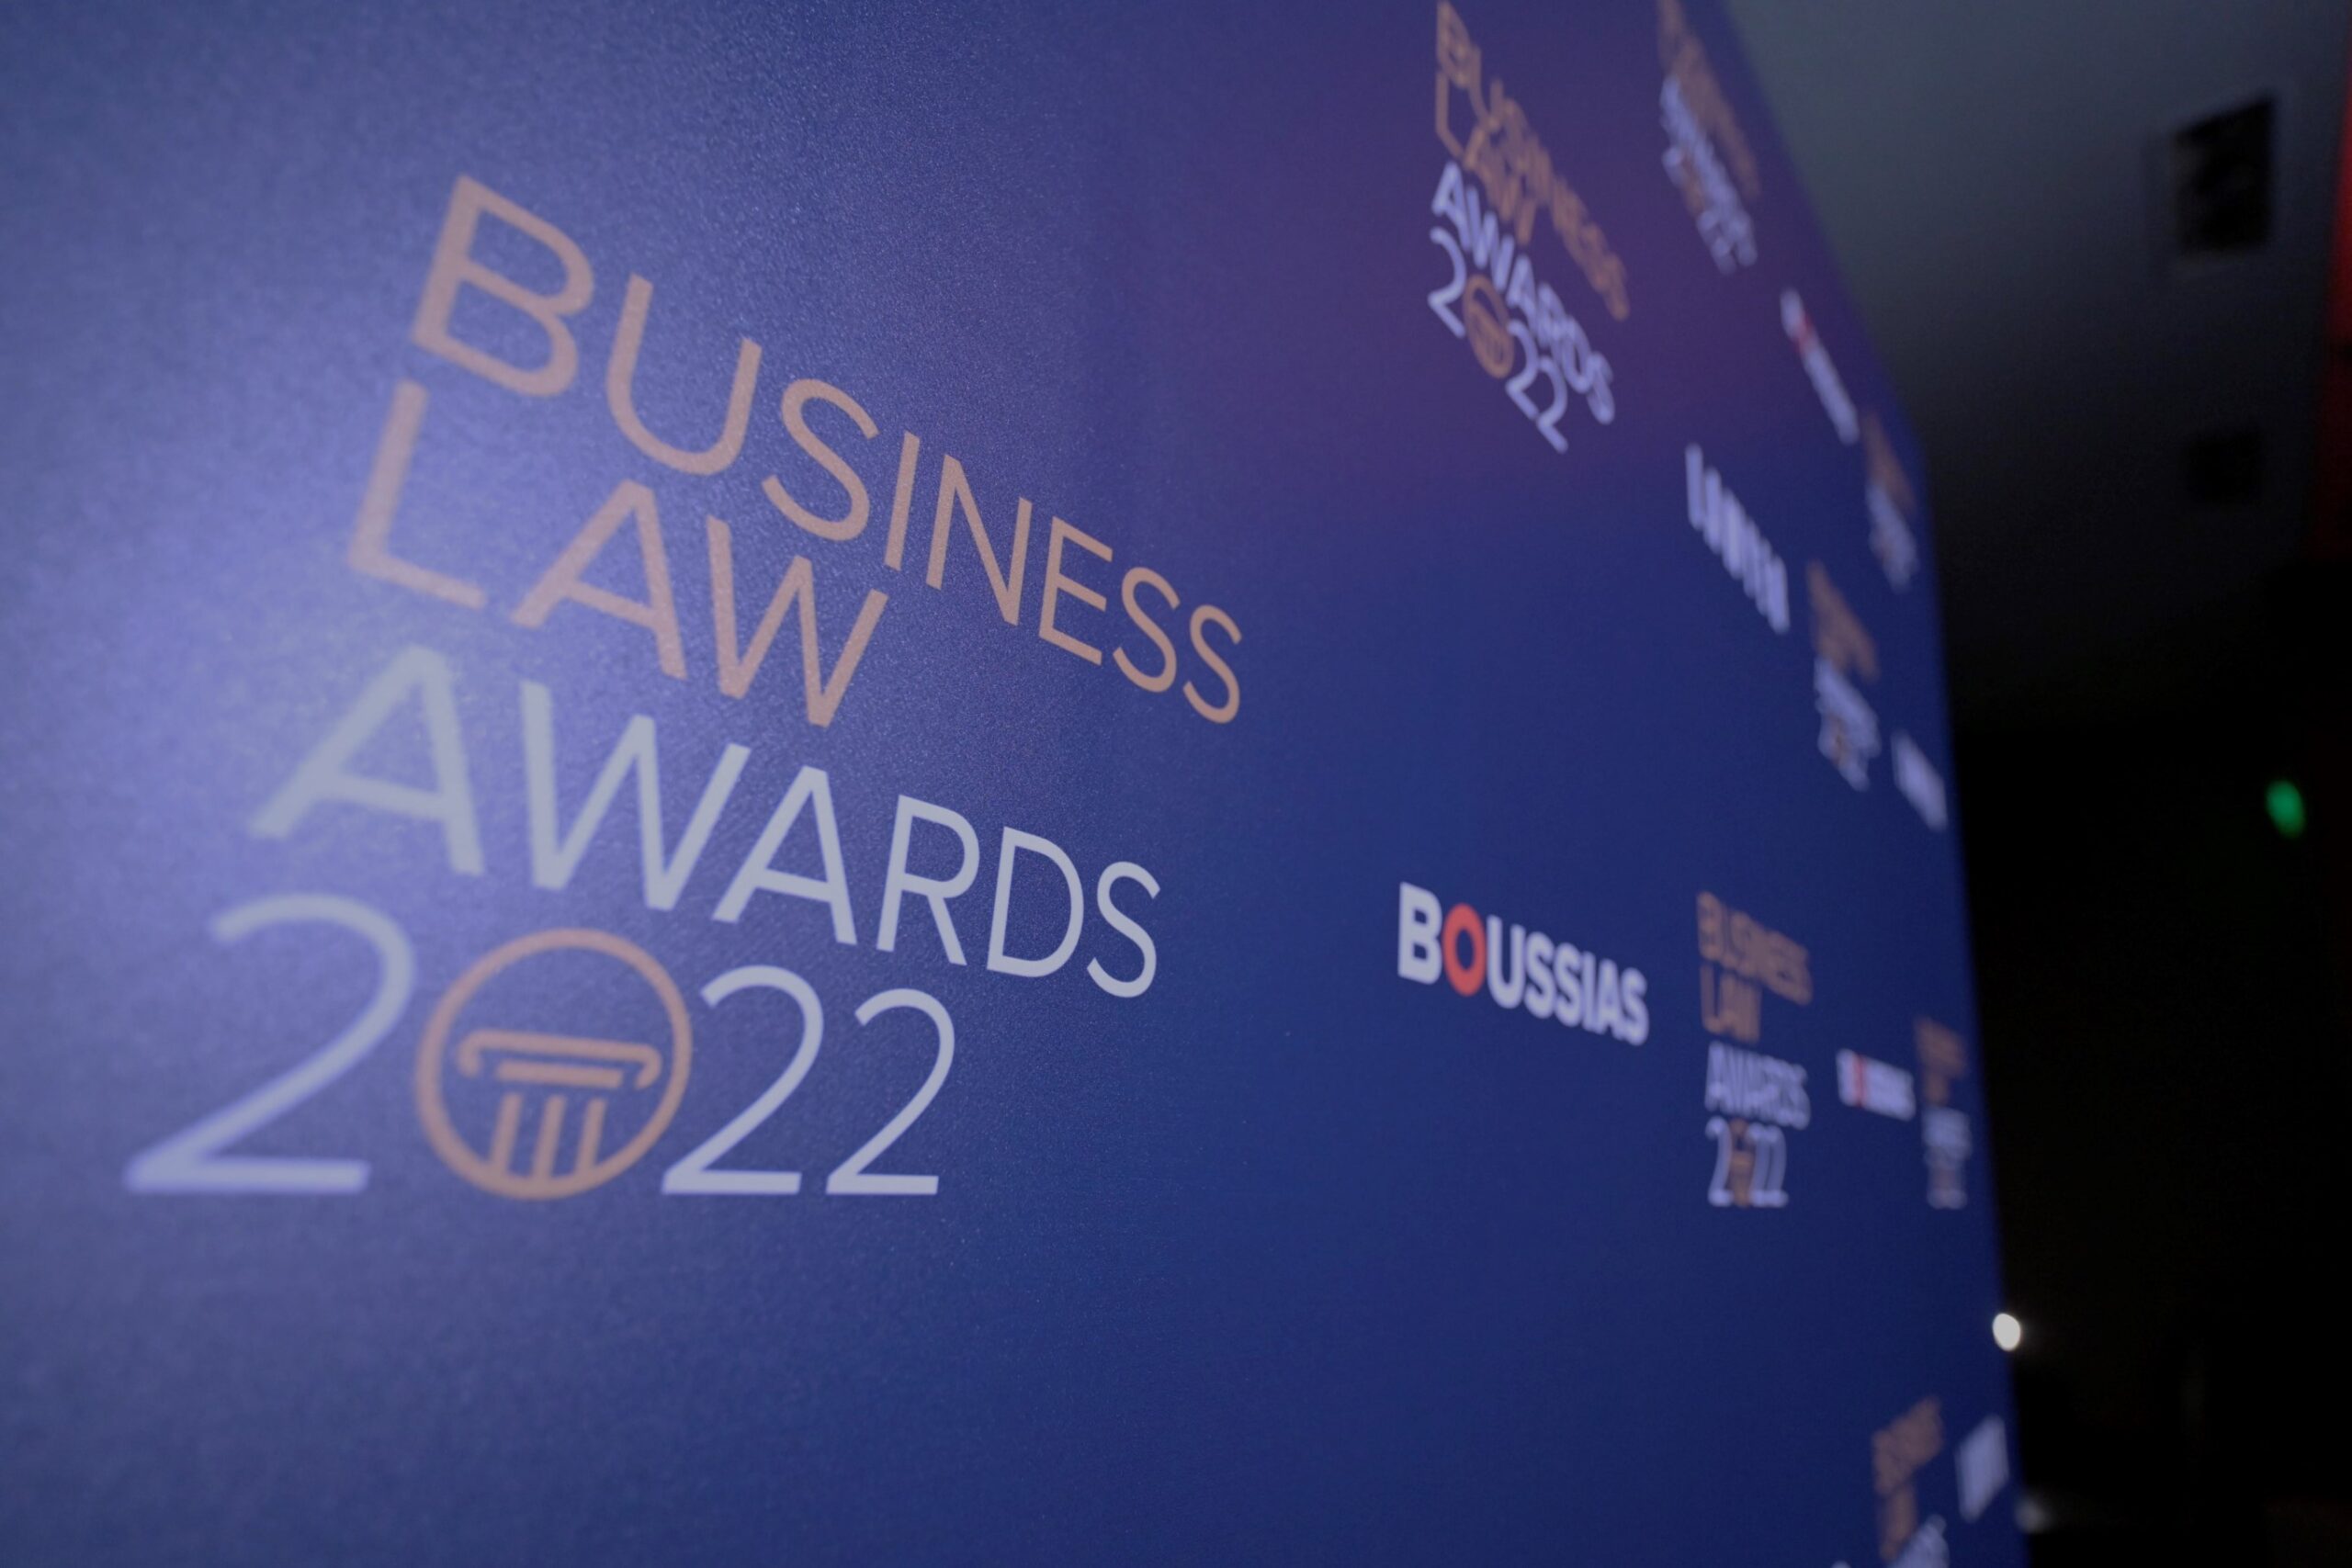 ZK Law receives 3 awards @ Business Law Awards